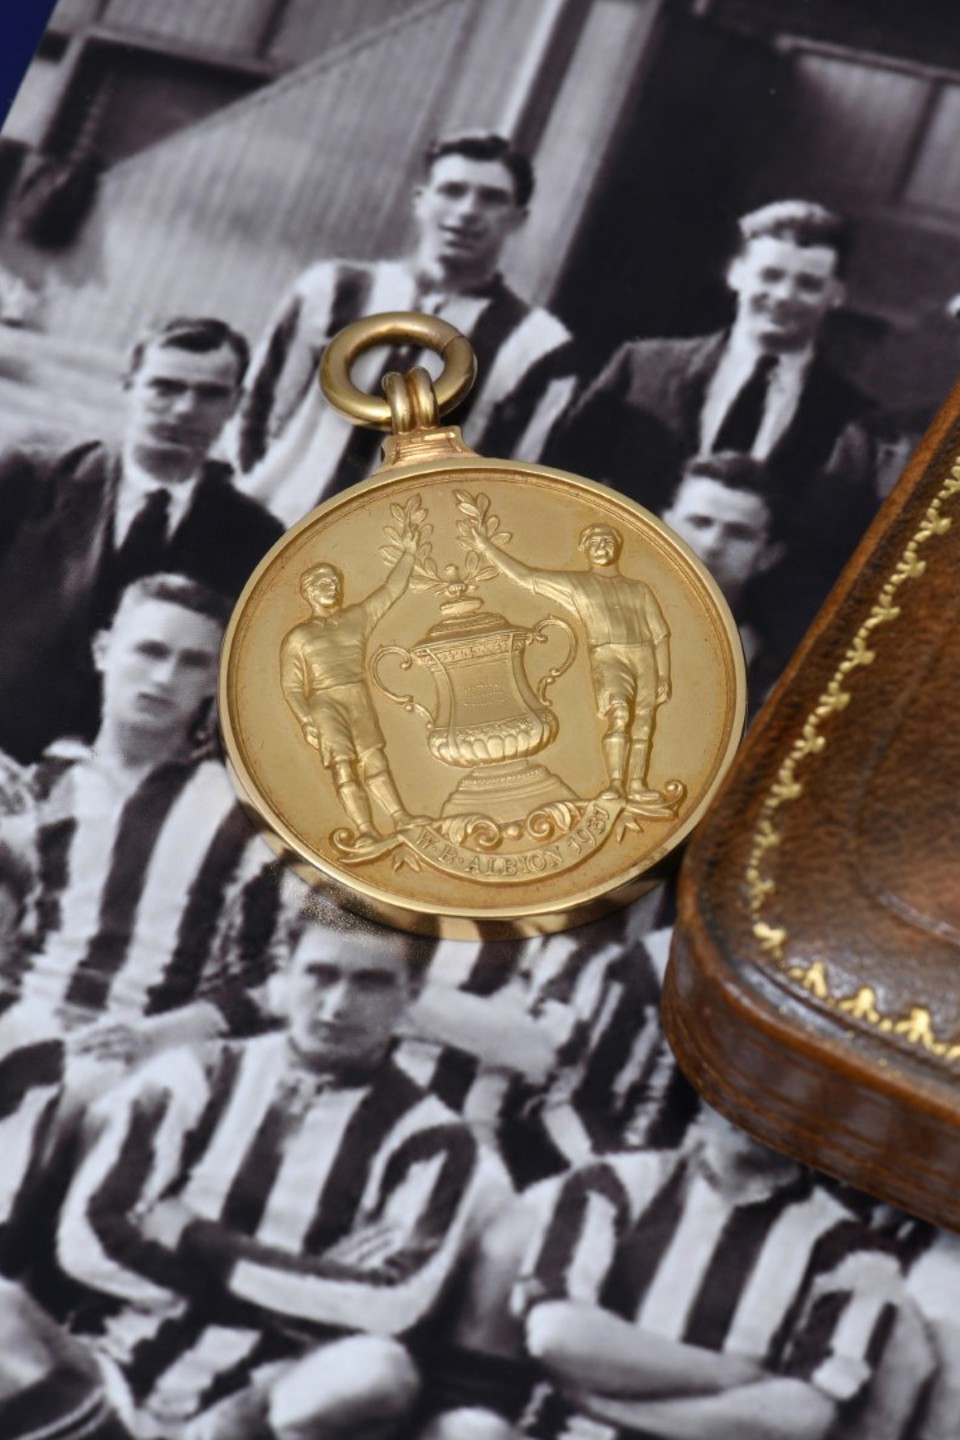 FA Cup winners medal from 1931 awarded to E Smith assistant secretary of West Bromwich Albion